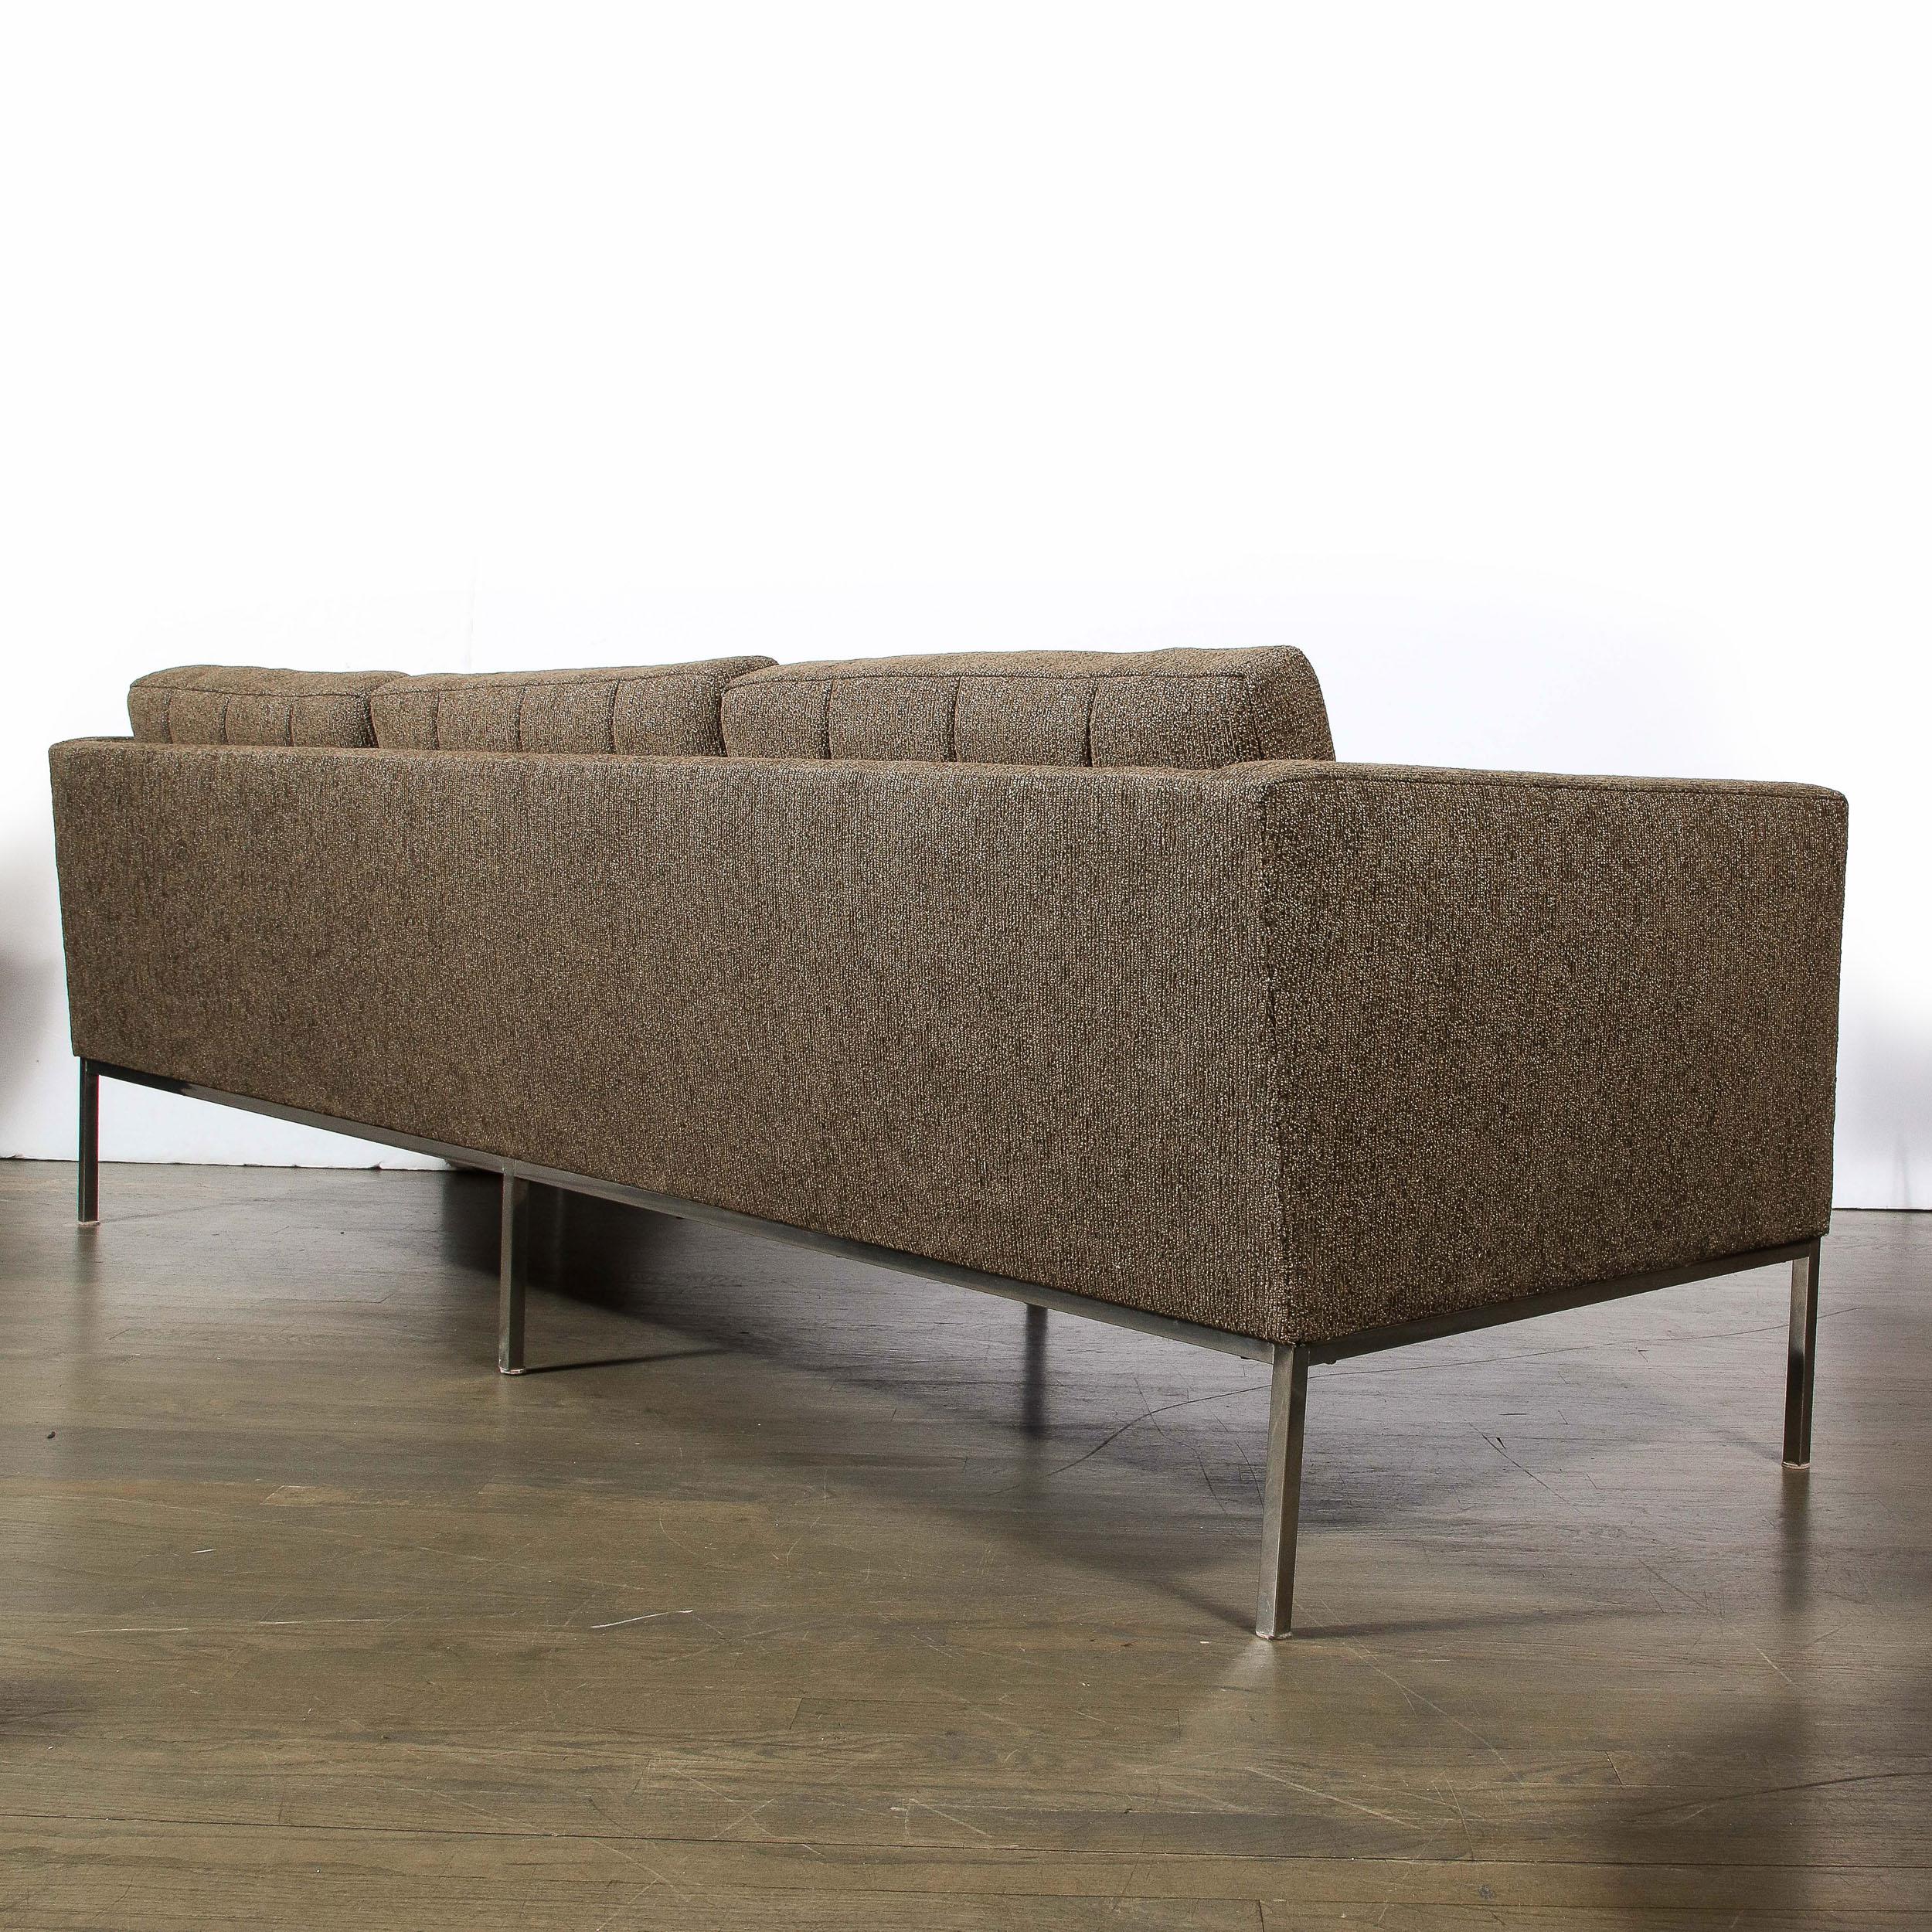 Modernist Biscuit Tufted 'Relaxed' Sofa in Holly Hunt Fabric by Florence Knoll  For Sale 3